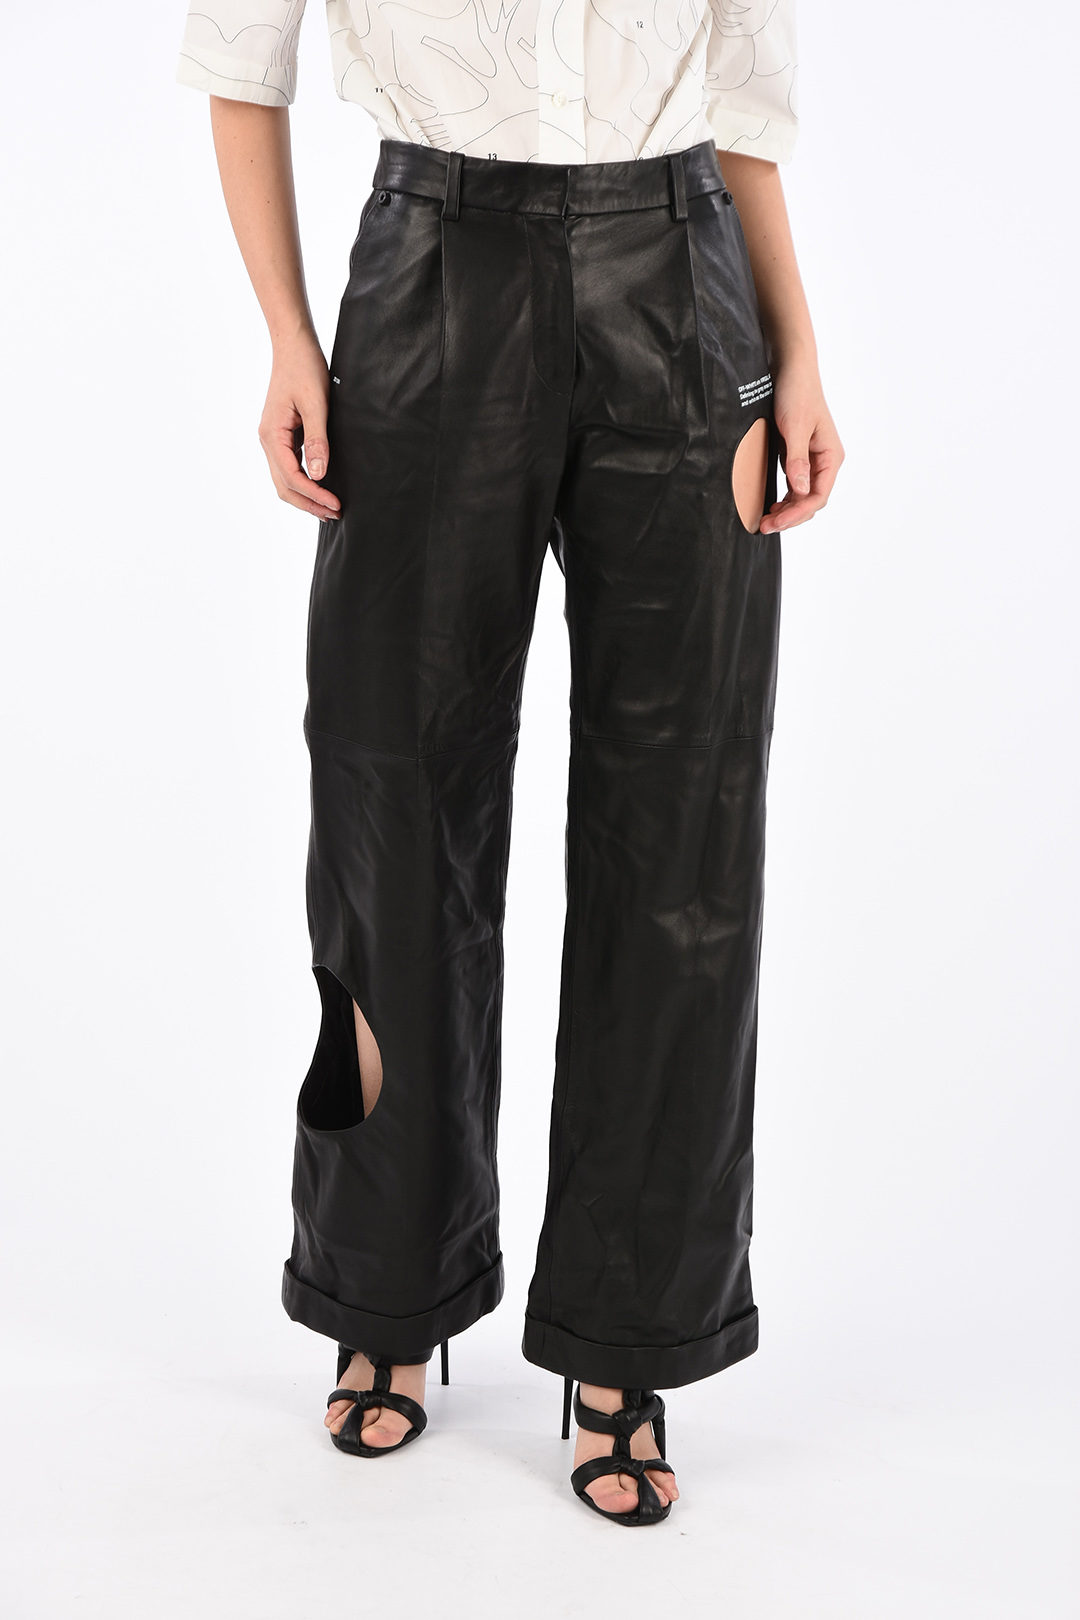 off-white cut-out pants | eclipseseal.com